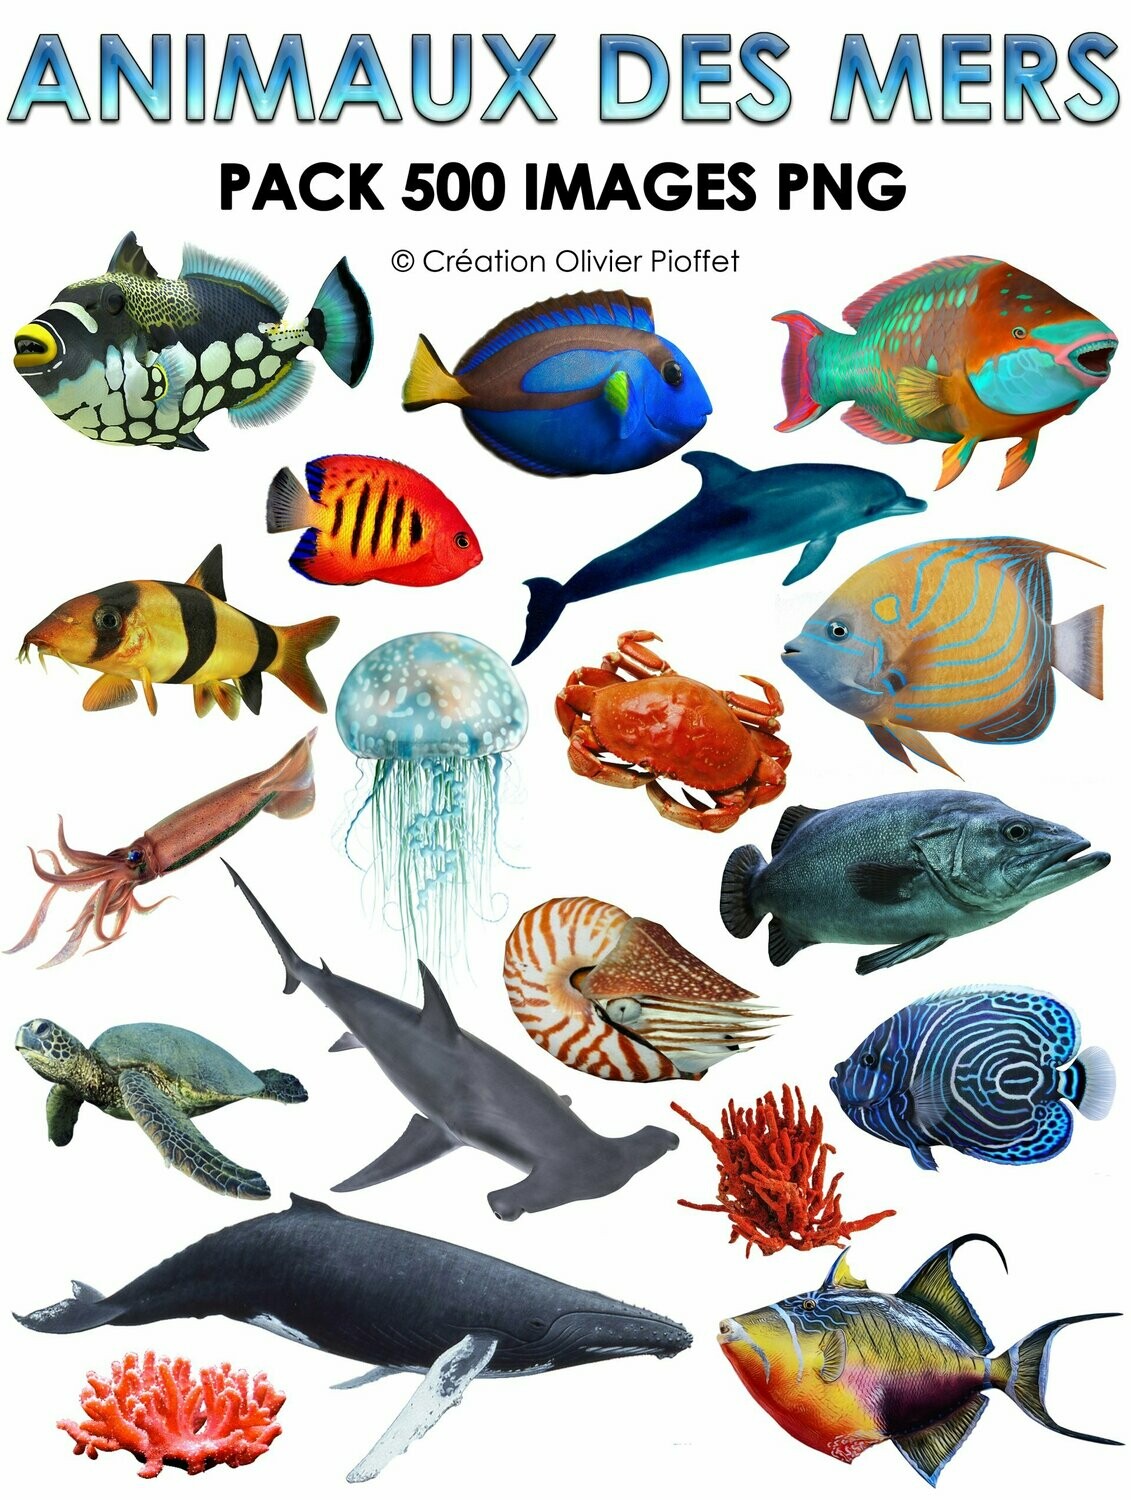 E. PACK ANIMAUX DES MERS 500 PNG